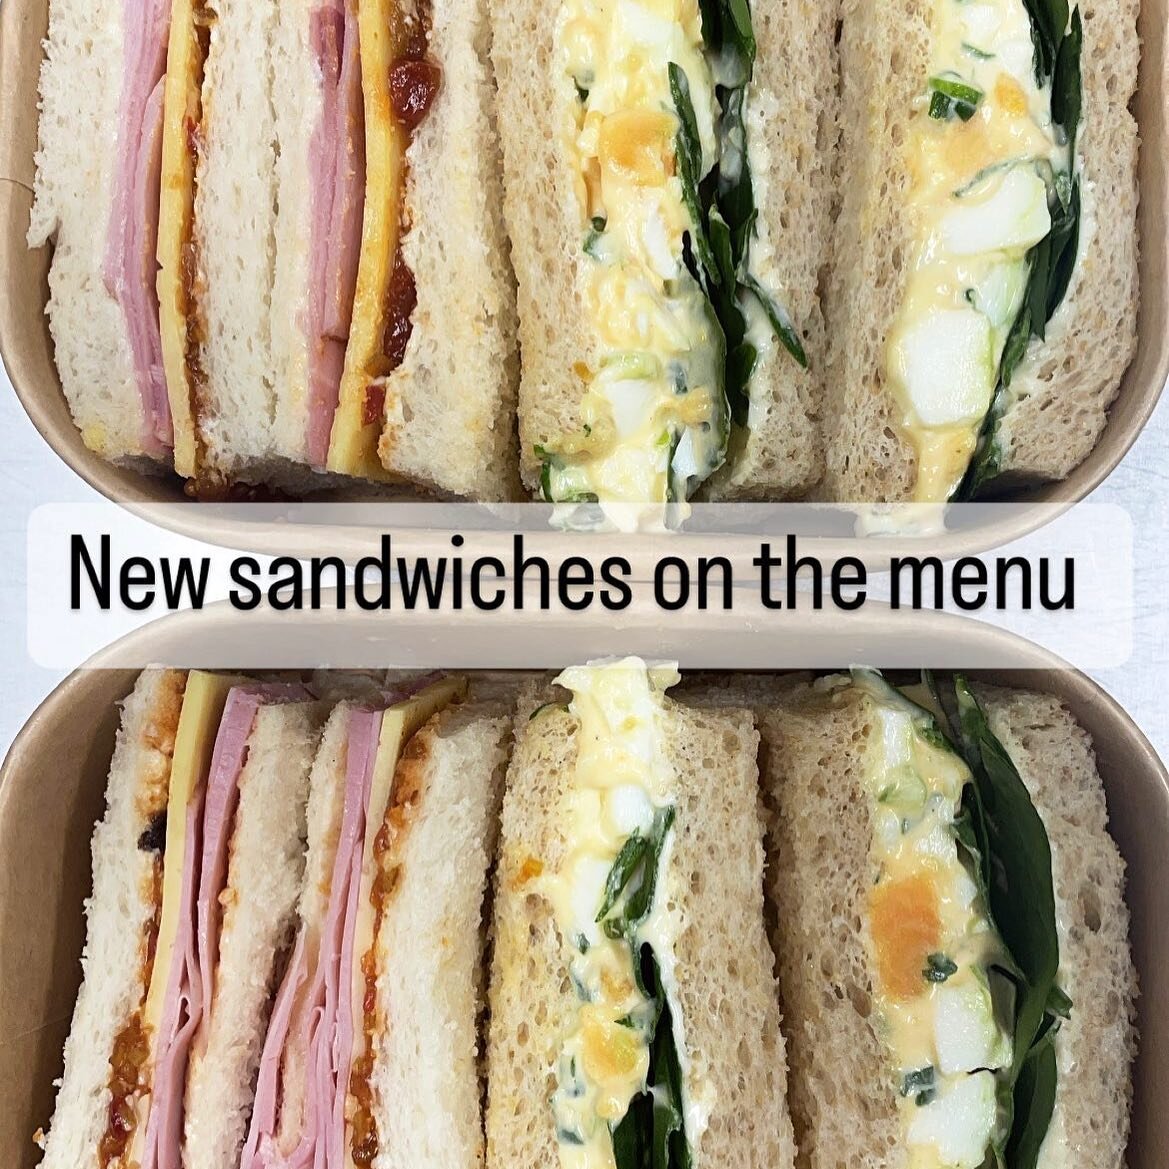 New sandwiches now available #catering #lunch #eastbentleigh